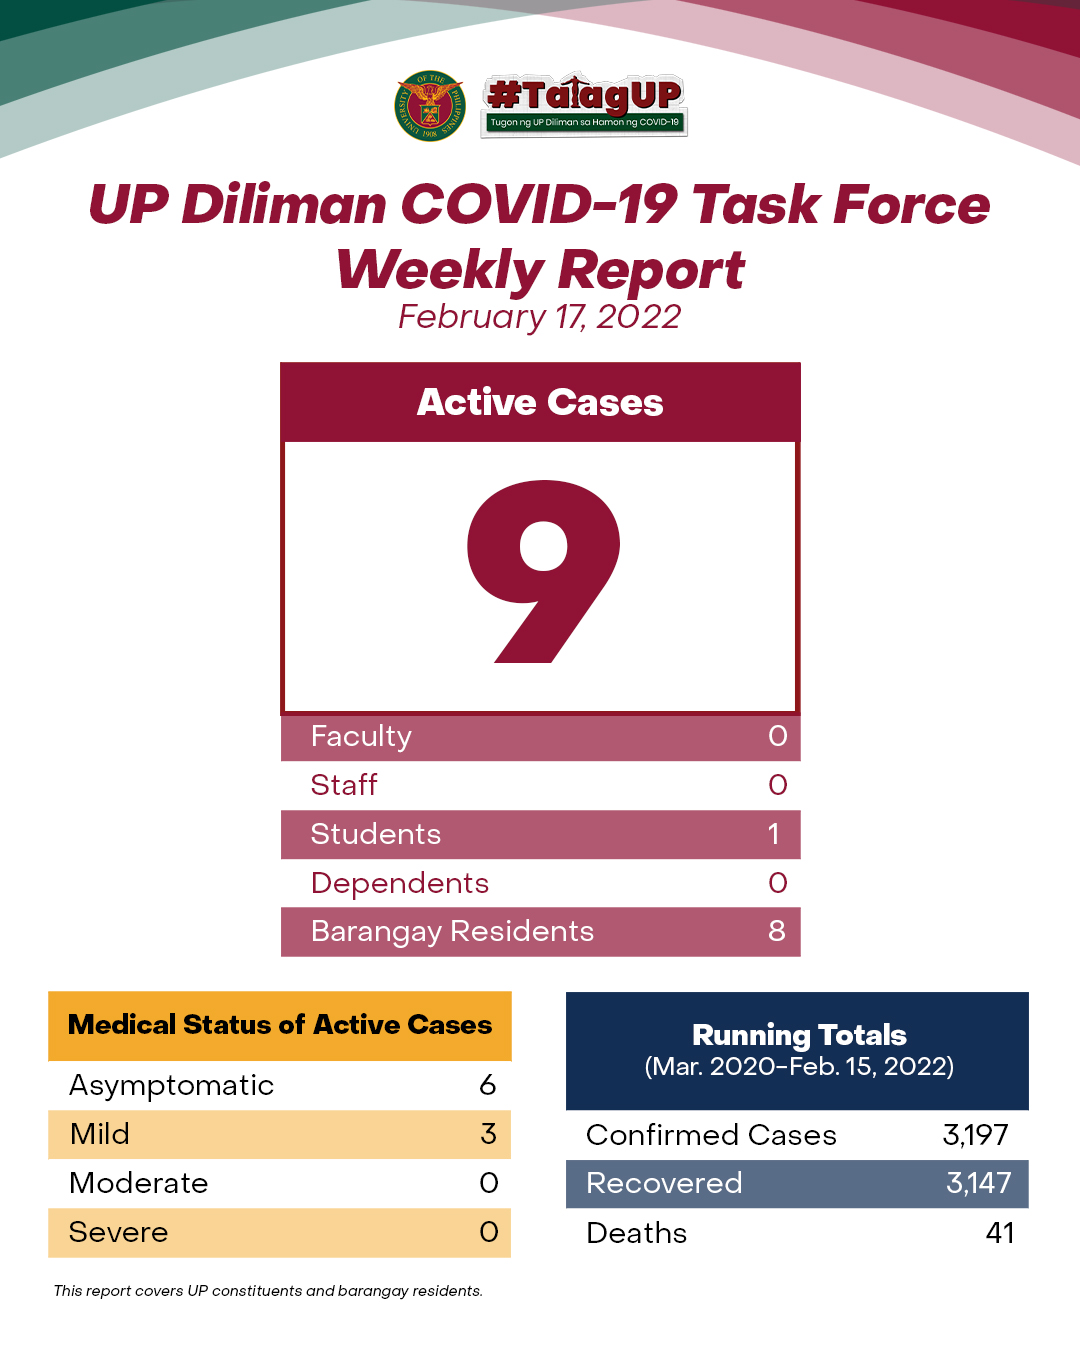 UP Diliman COVID-19 Task Force Weekly Report (February 17, 2022)